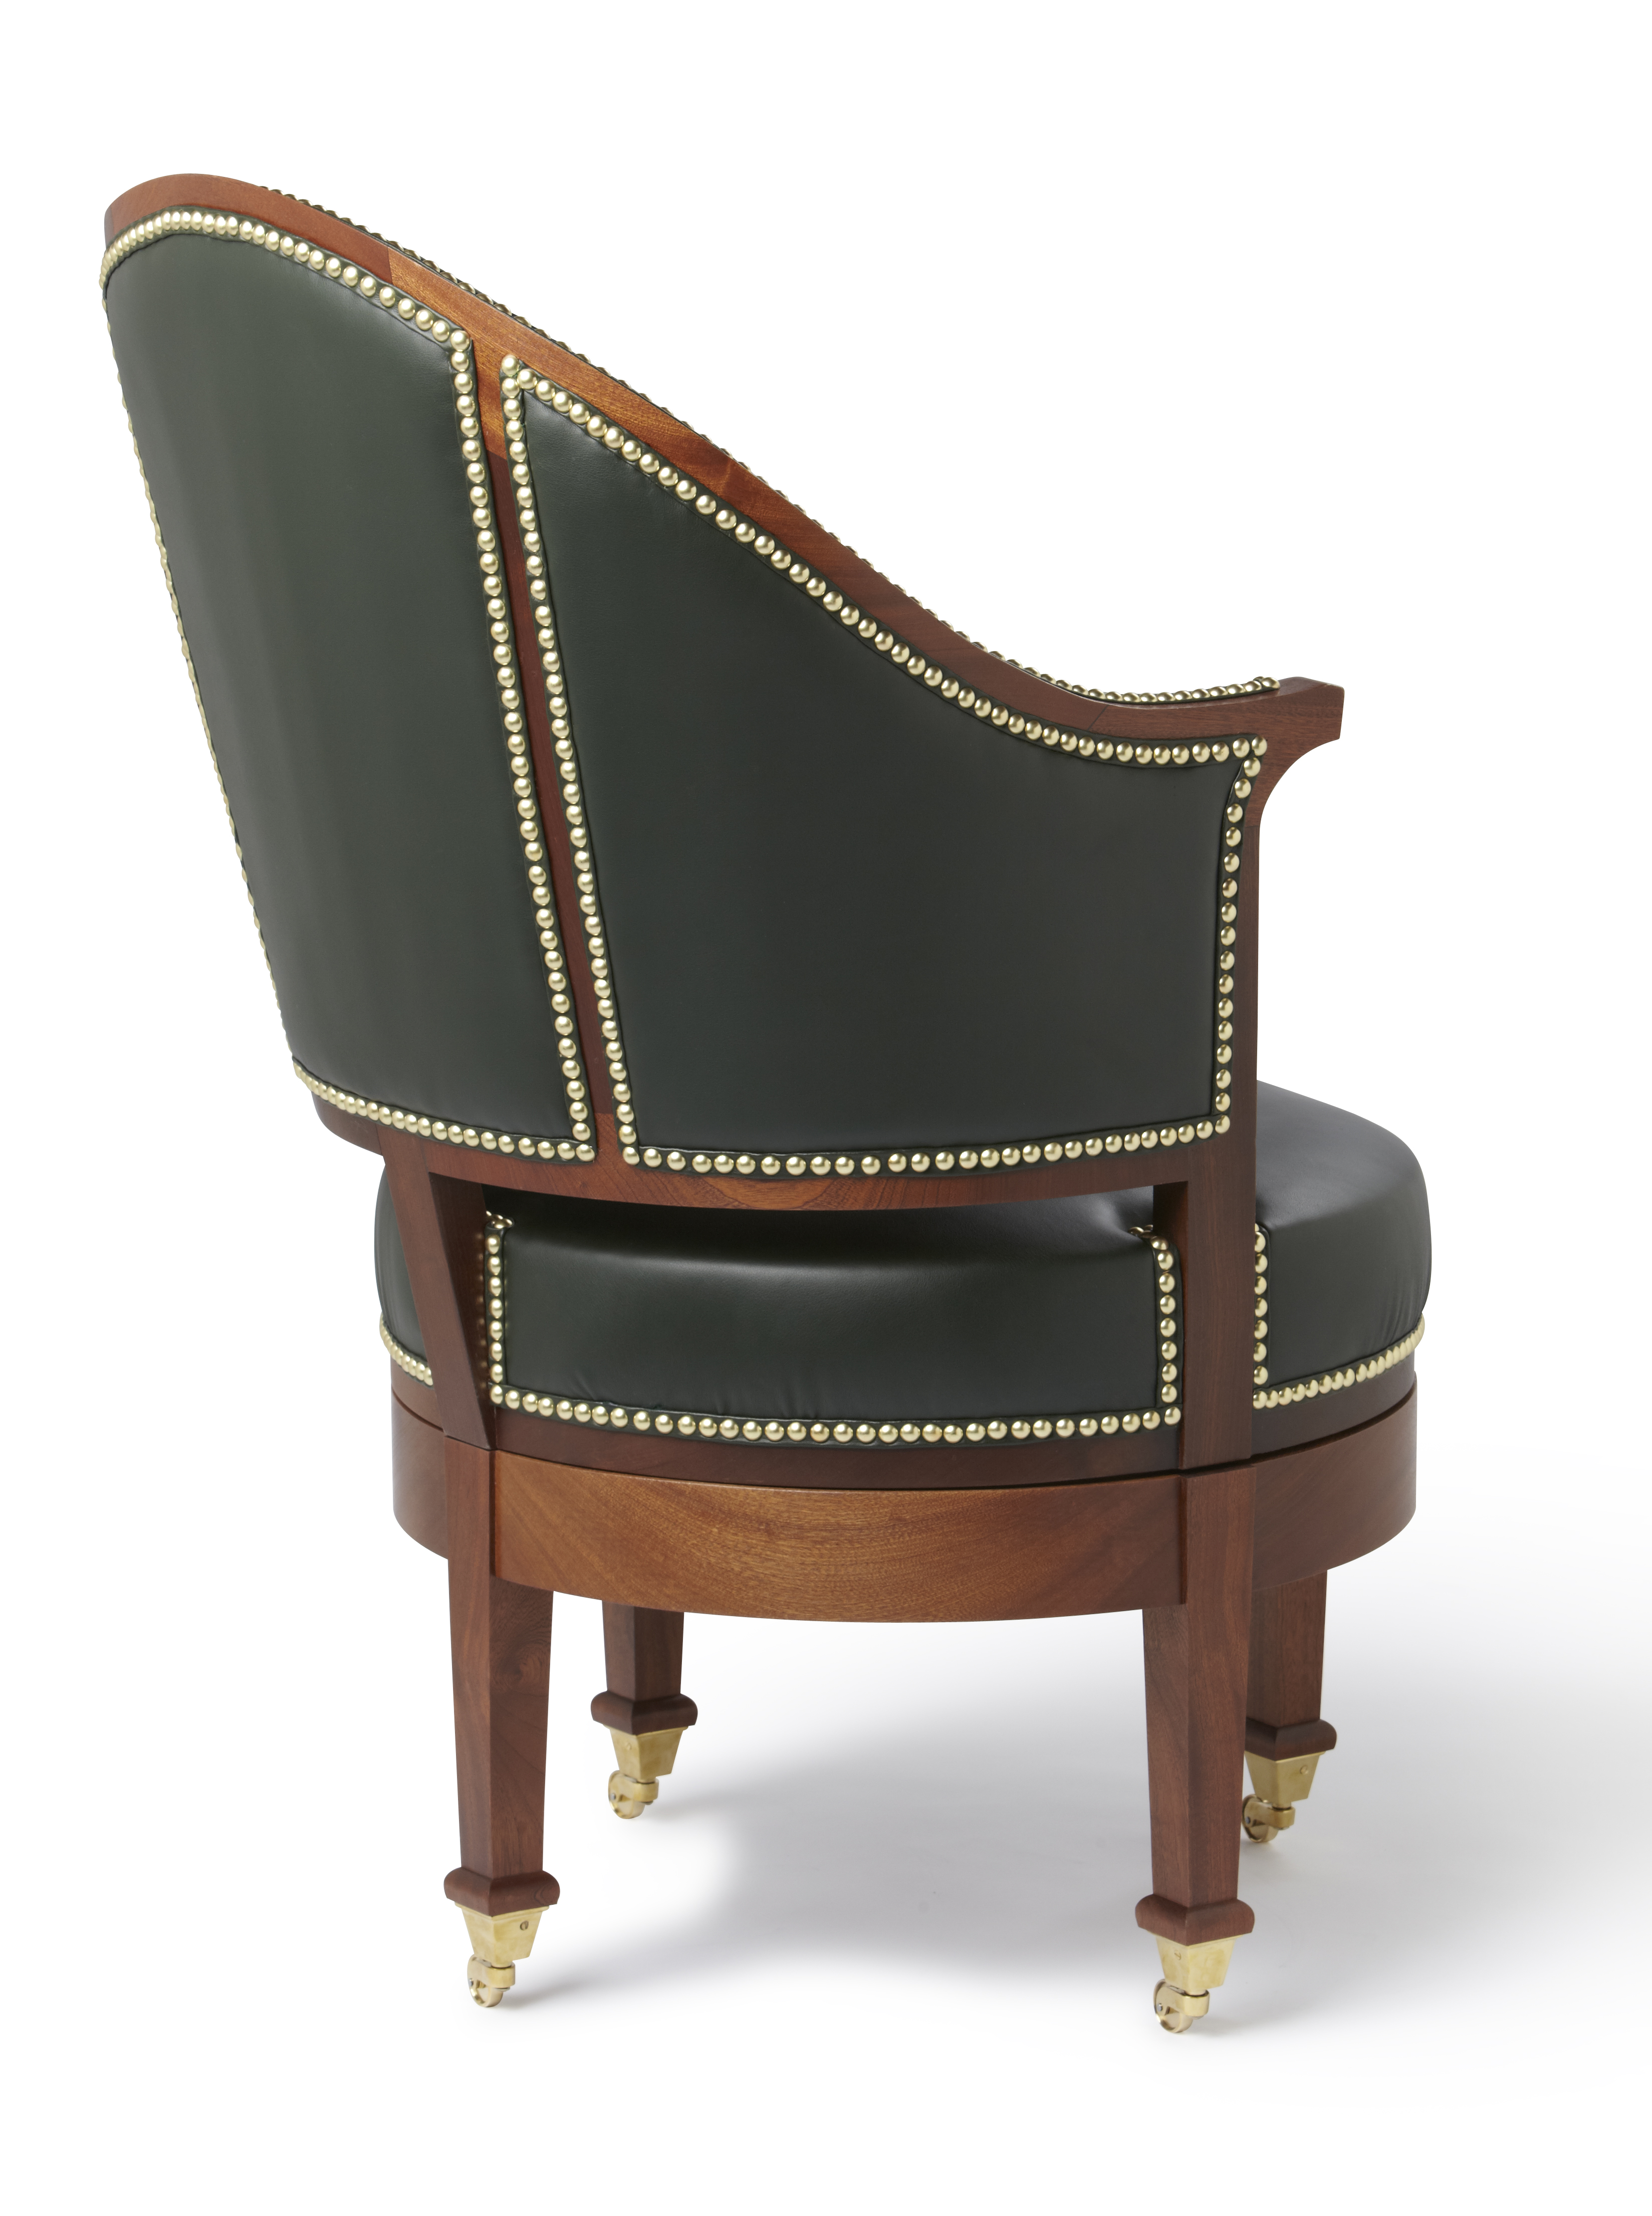 George Washington S Uncommon Chair Reproduction Furniture Chicone